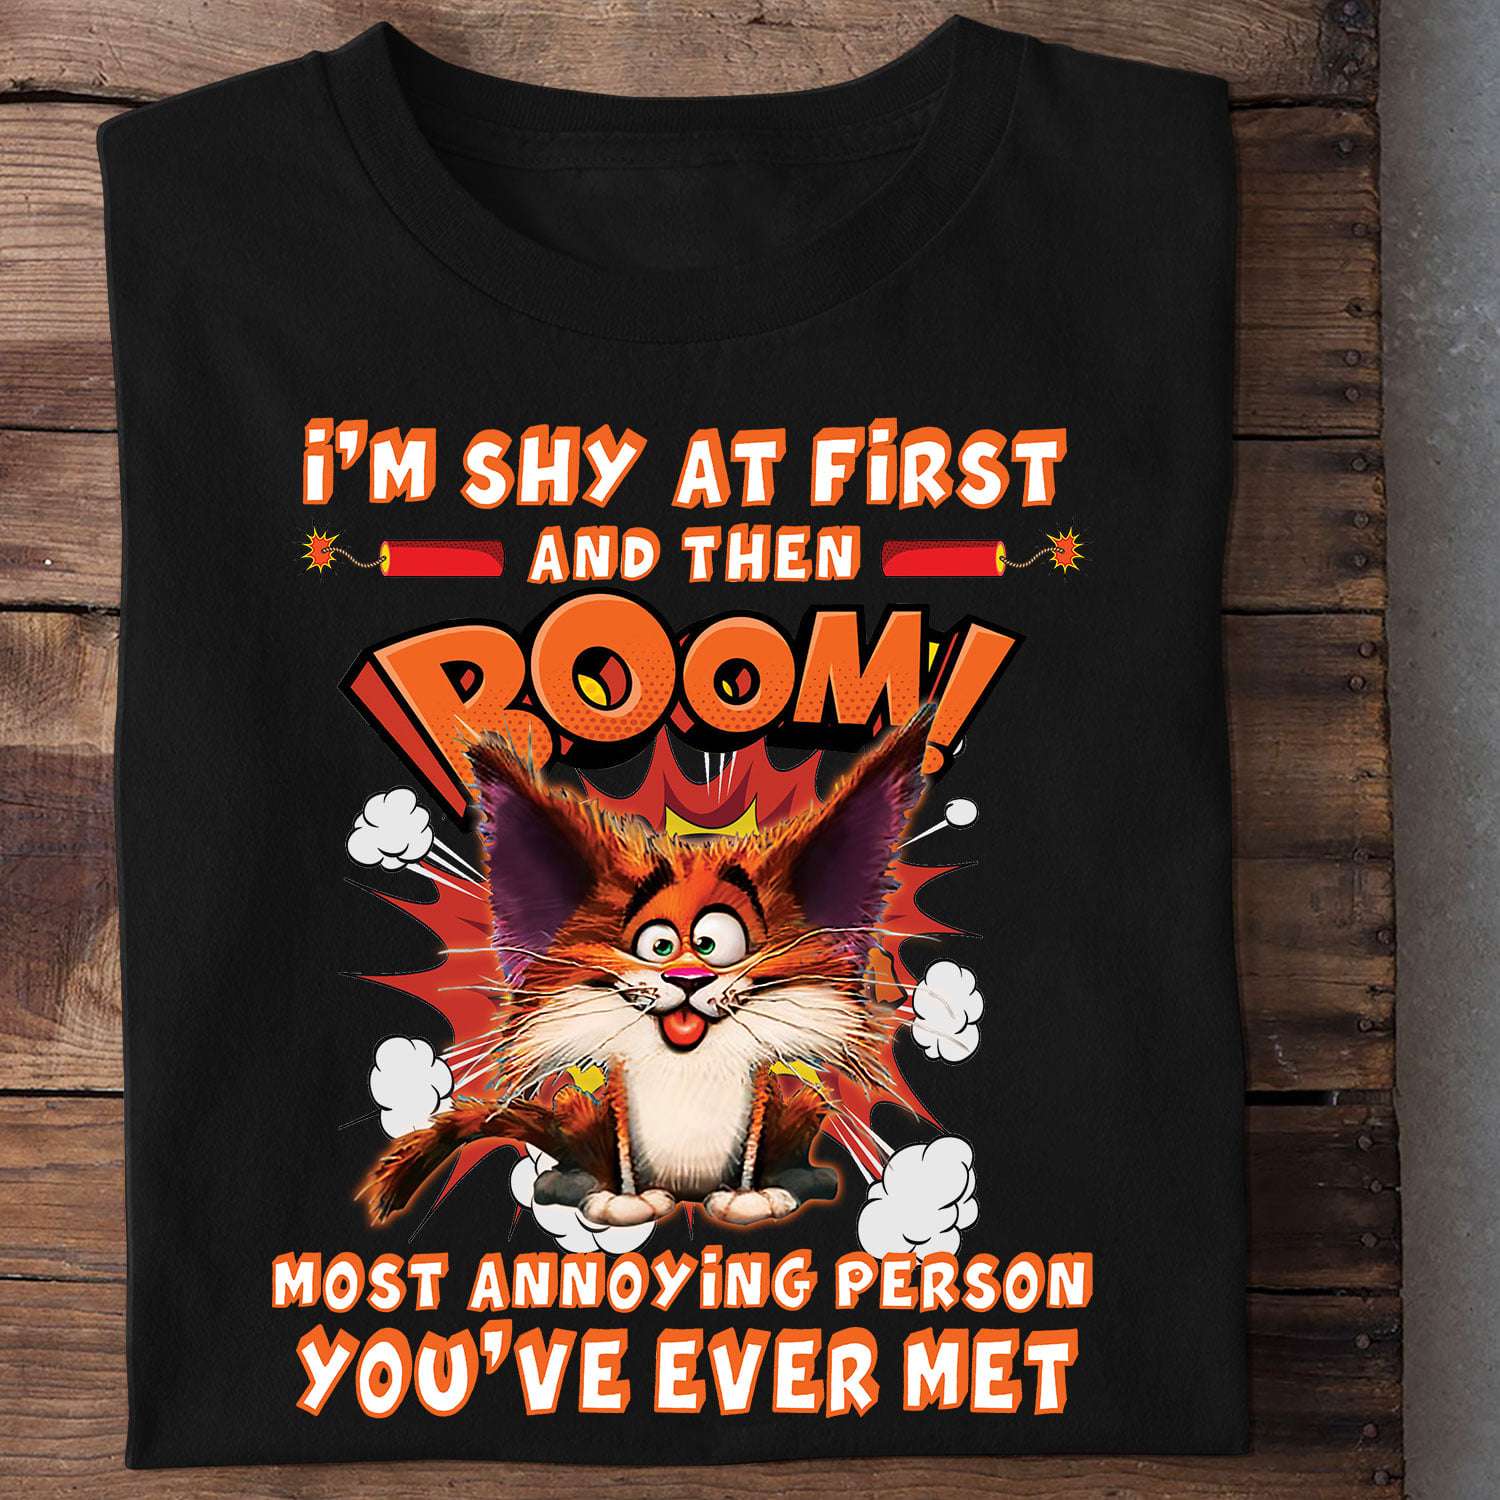 I'm shy at first and then broom most annoying person you've ever met - Crazy Cat, Gift For Cat Lover